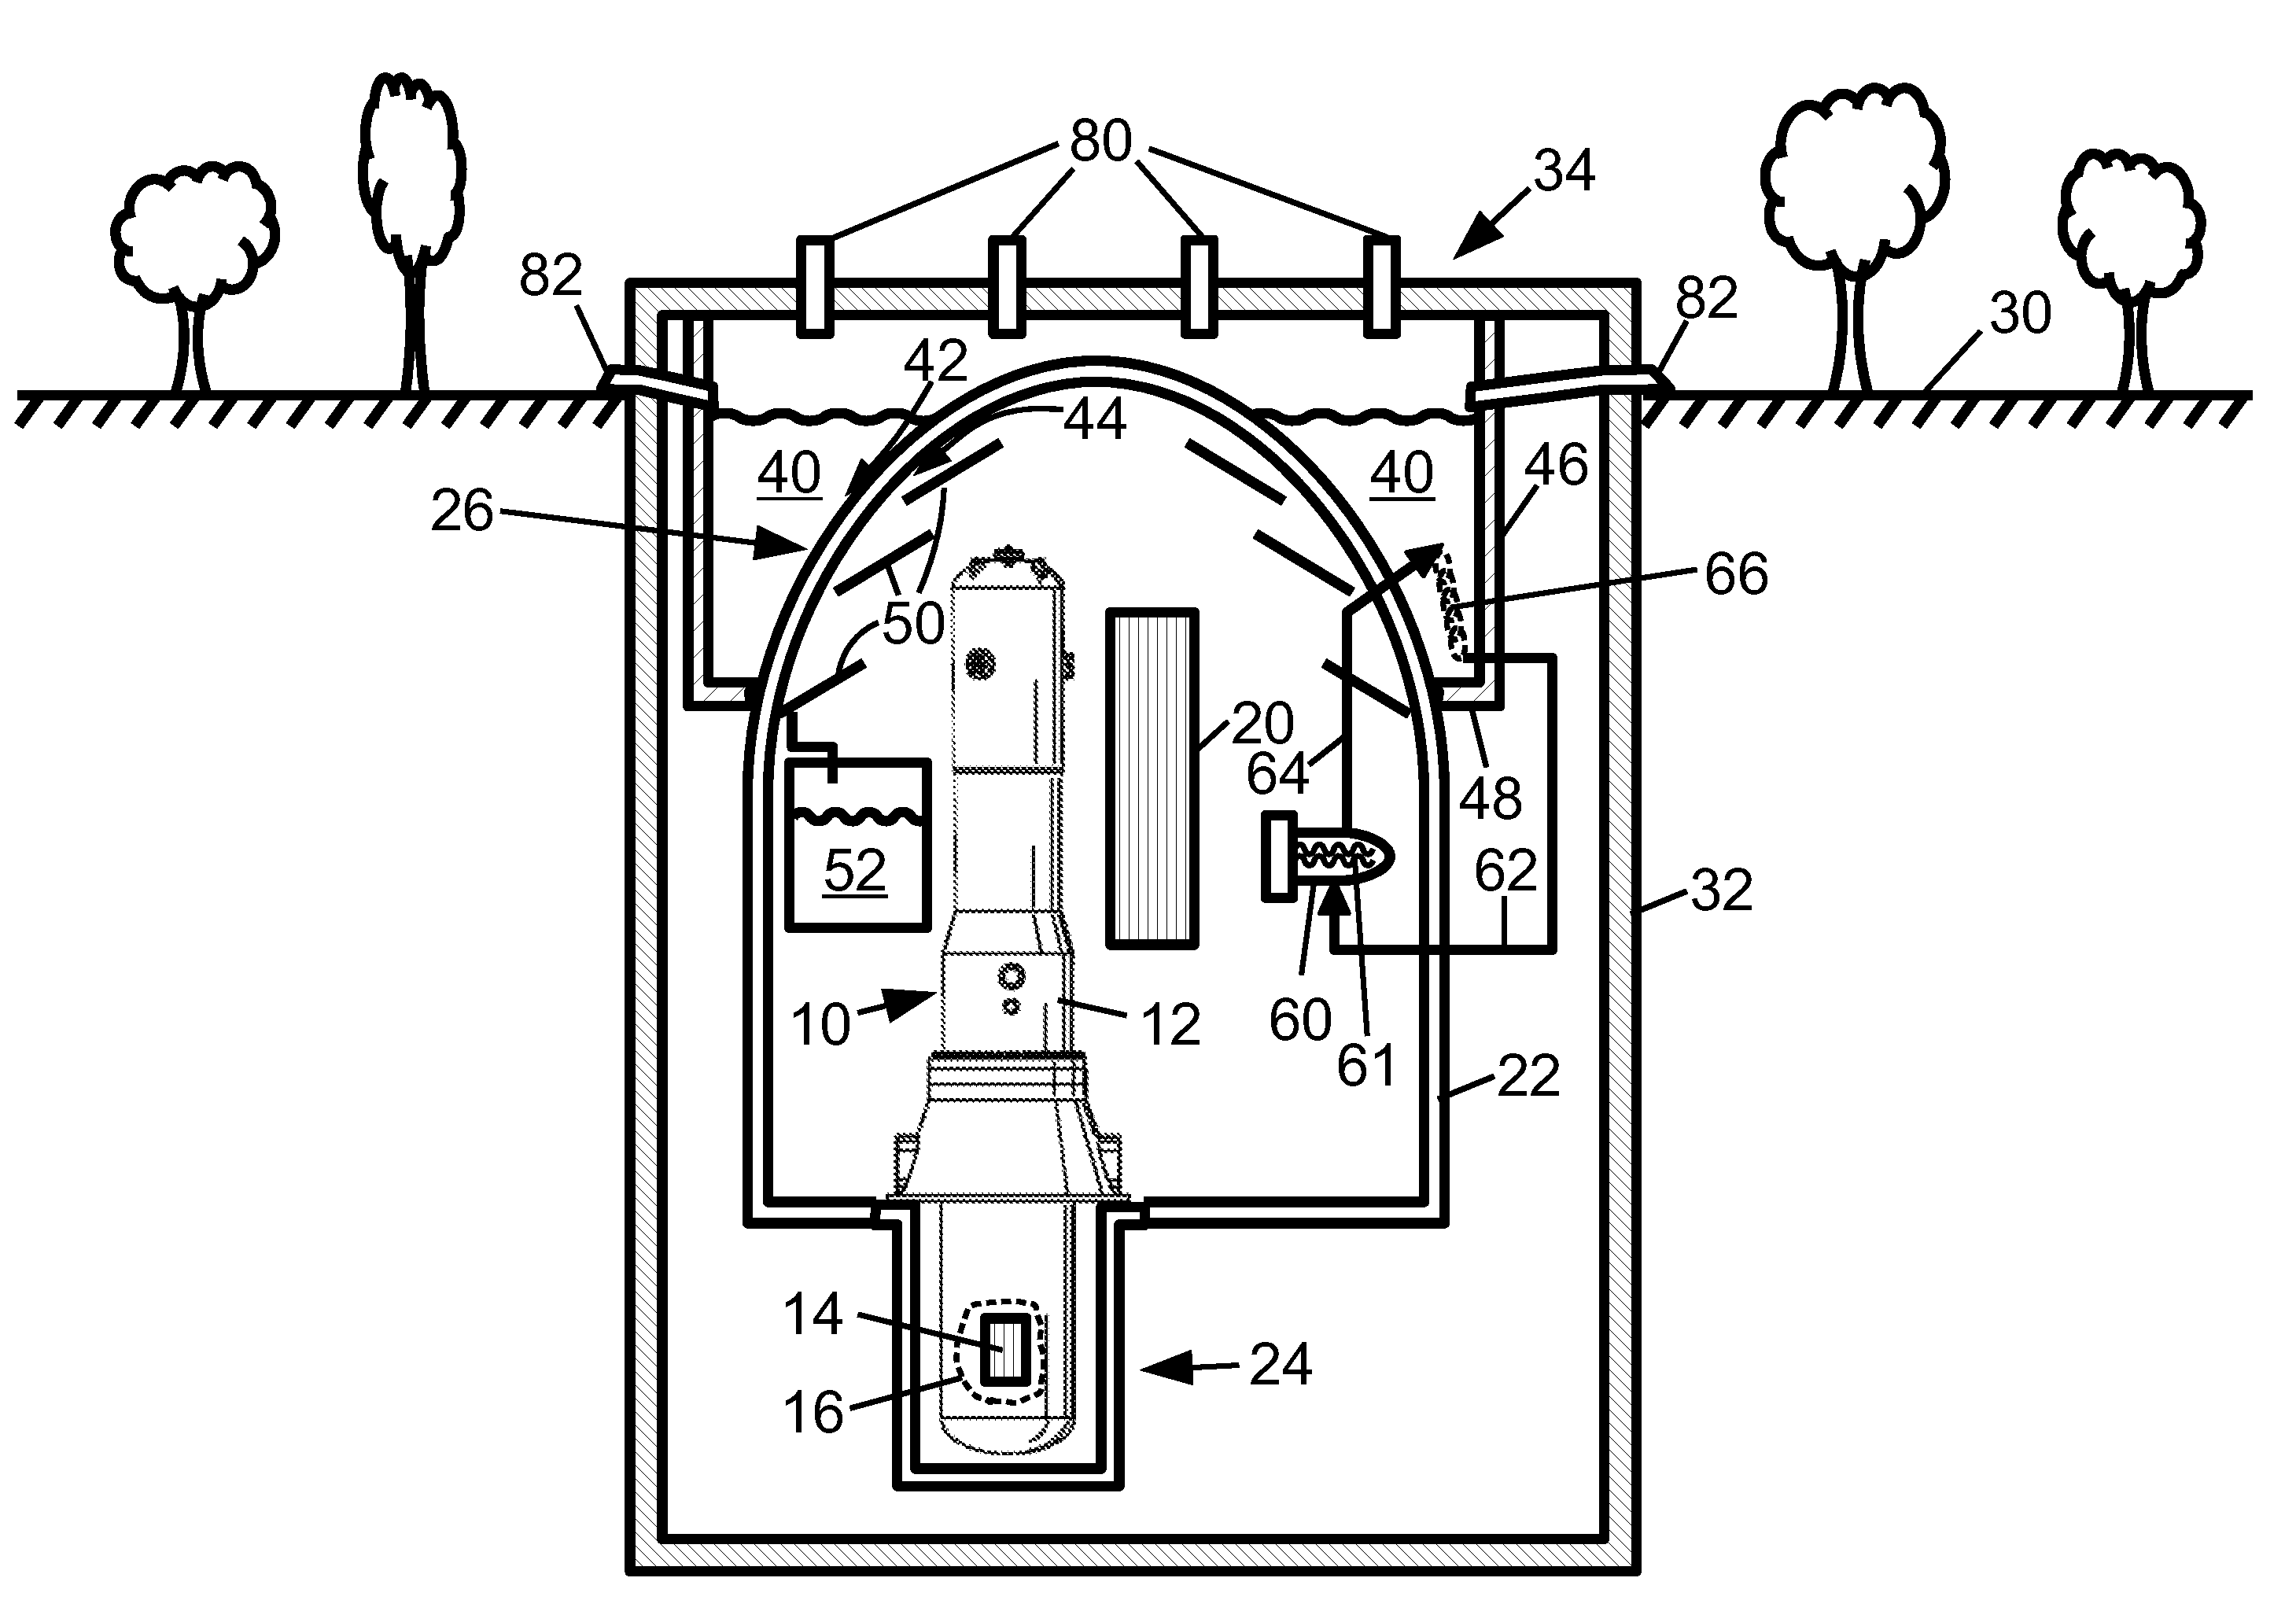 Pressurized water reactor with compact passive safety systems